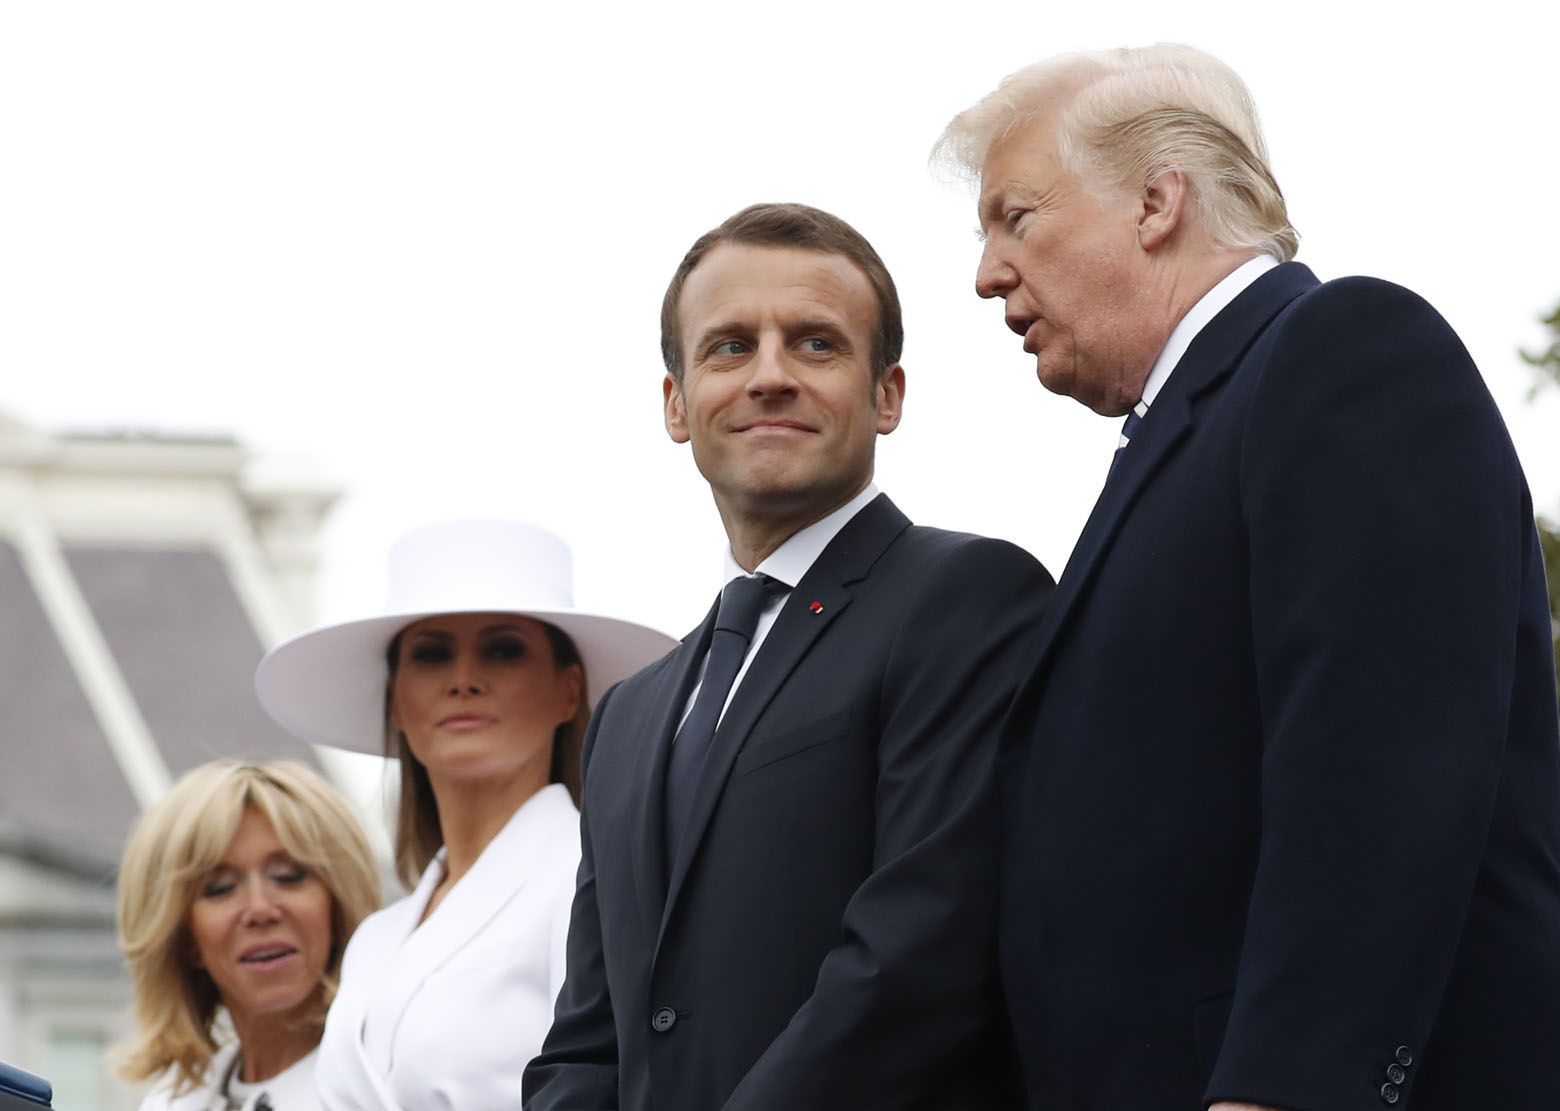 President Donald Trump, French President Emmanuel Macron, first lady Melania Trump, and Brigitte Macron stand during a State Arrival Ceremony on the South Lawn of the White House in Washington, Tuesday, April 24, 2018. (AP Photo/Pablo Martinez Monsivais)